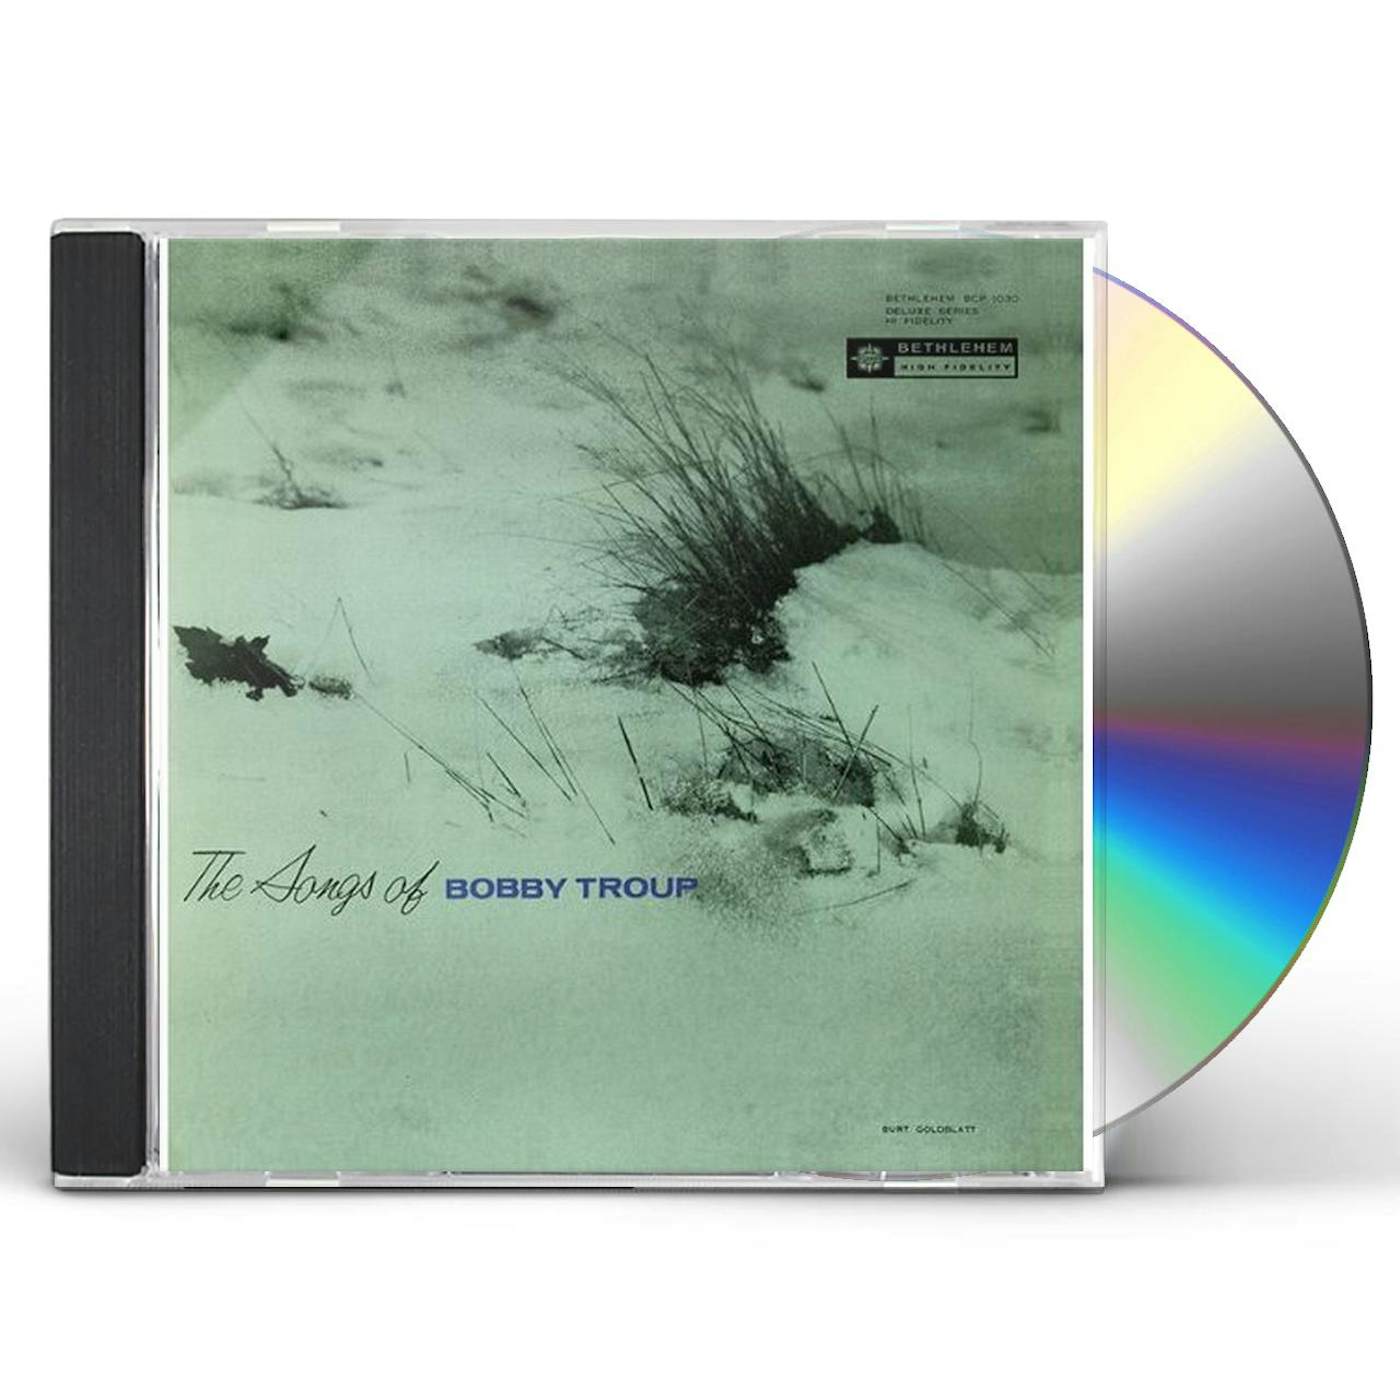 SONGS OF BOBBY TROUP CD